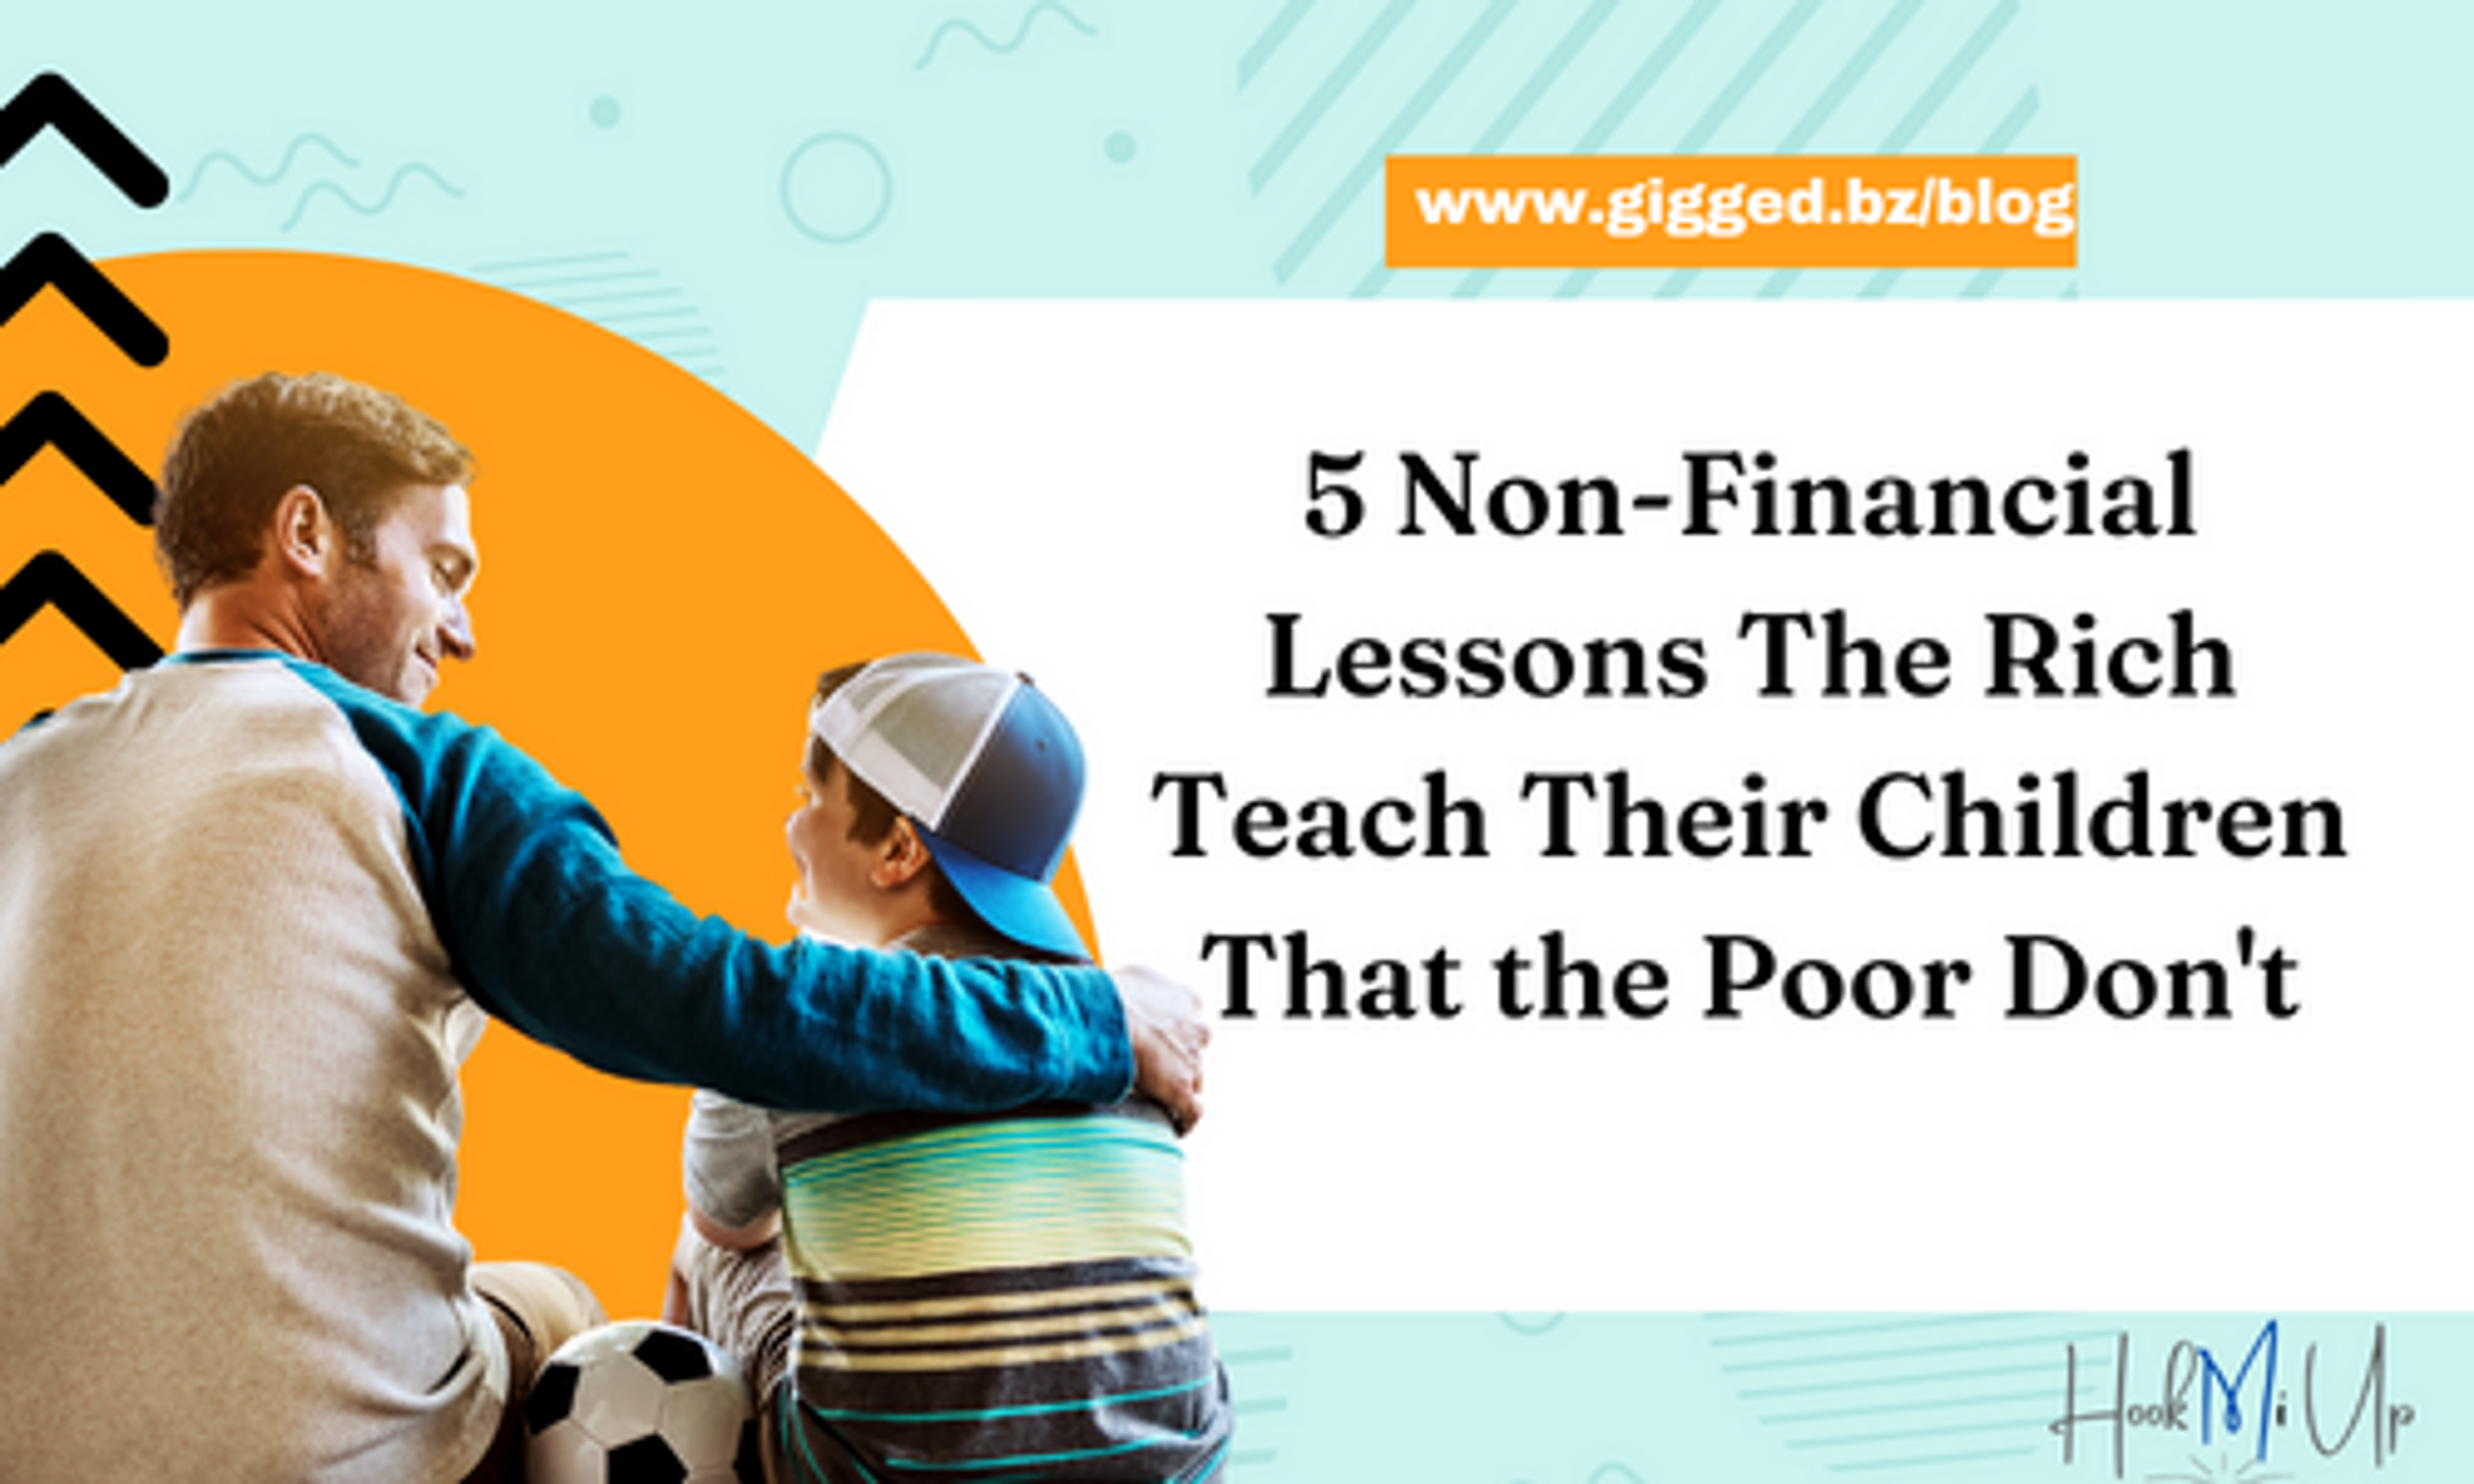 5 Non-Financial Lessons The Rich Teach Their Children That the Poor Don't